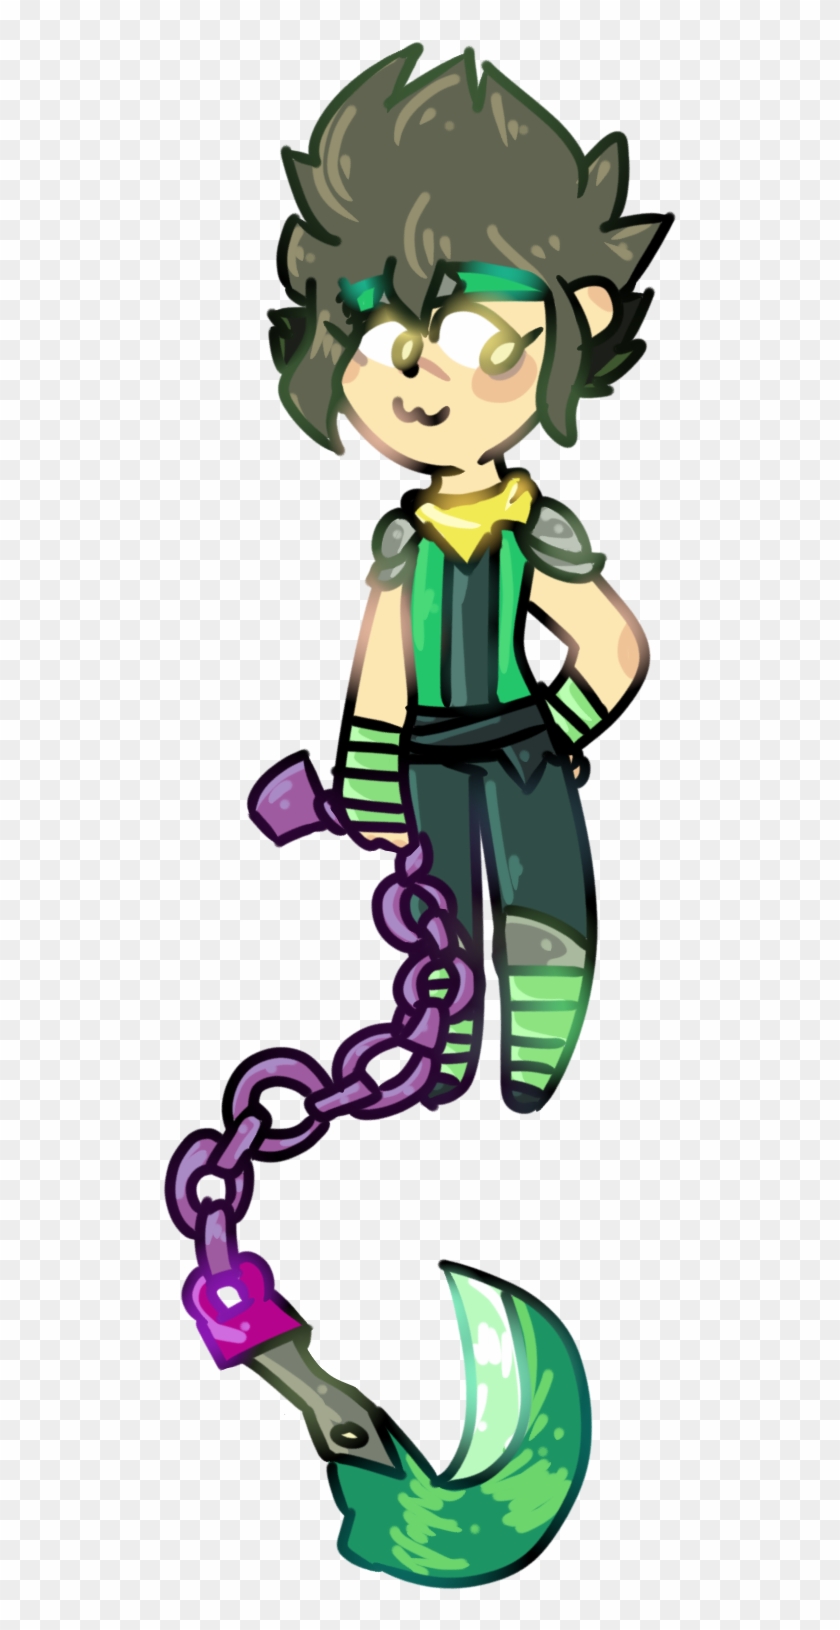 Fan Creationguy With Weird Spiky Hair And A Kusarigama - Cartoon #1682134